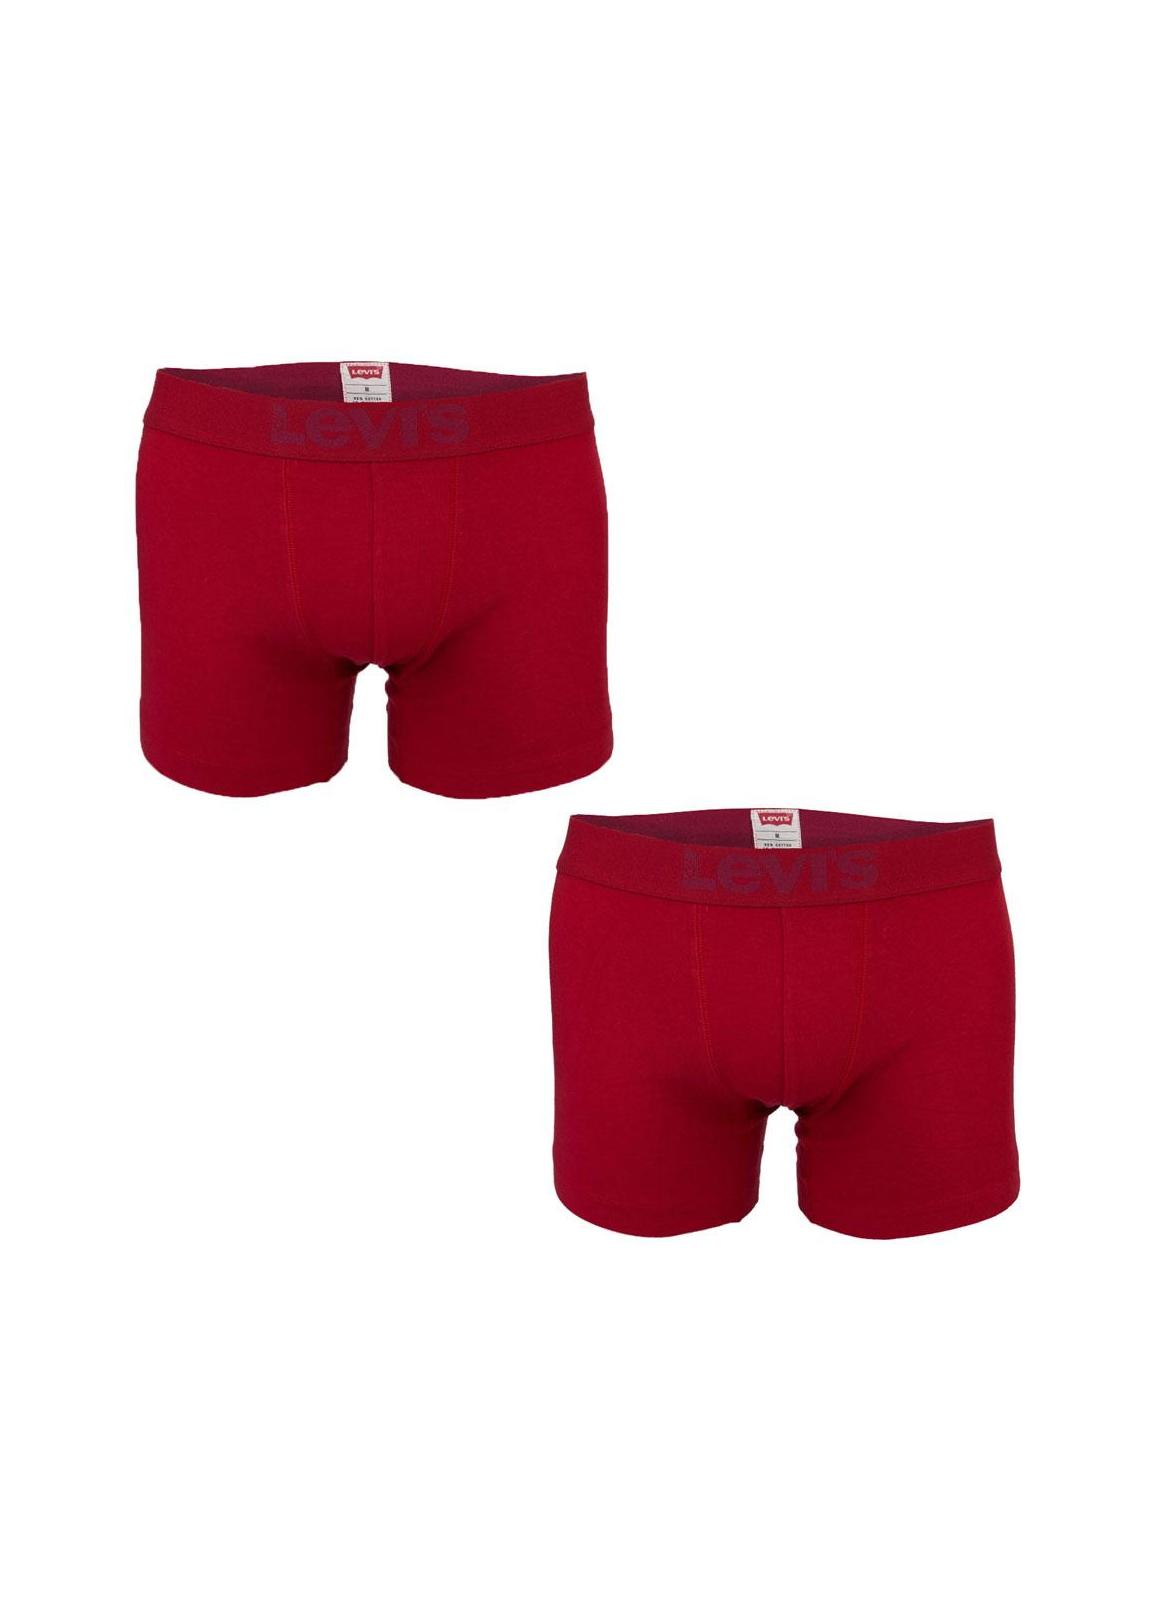 Levi's® Bodywear 2 Pack 200sf Boxer Brief - Red